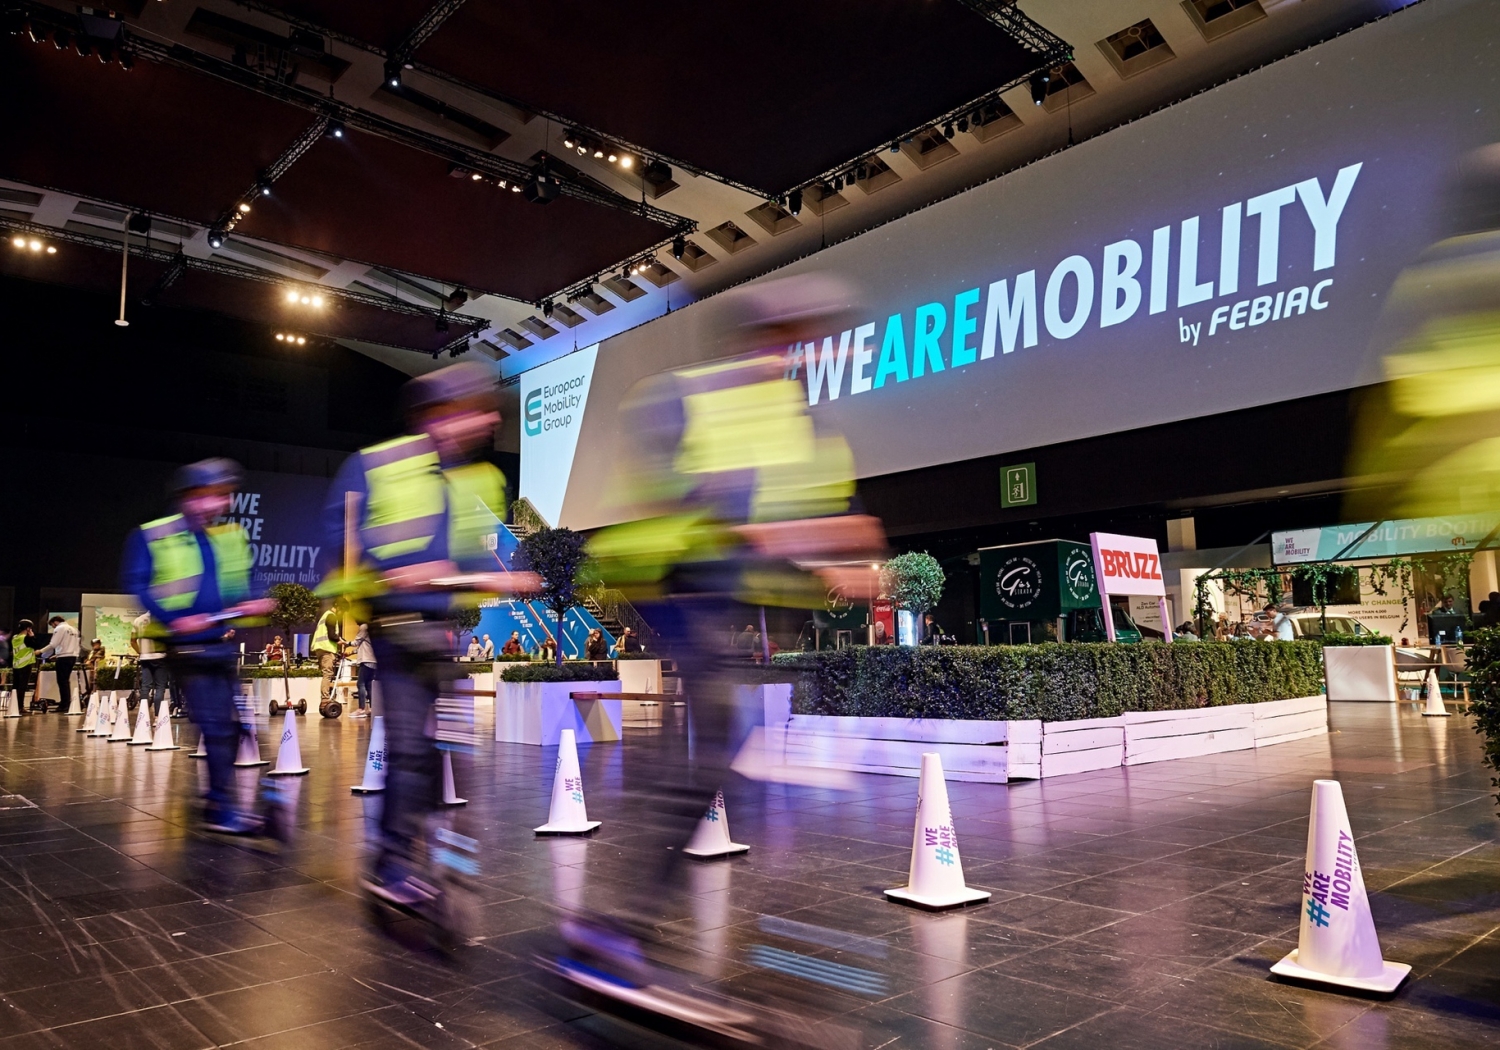 Brussels Motorshow 2019 | We Are Mobility